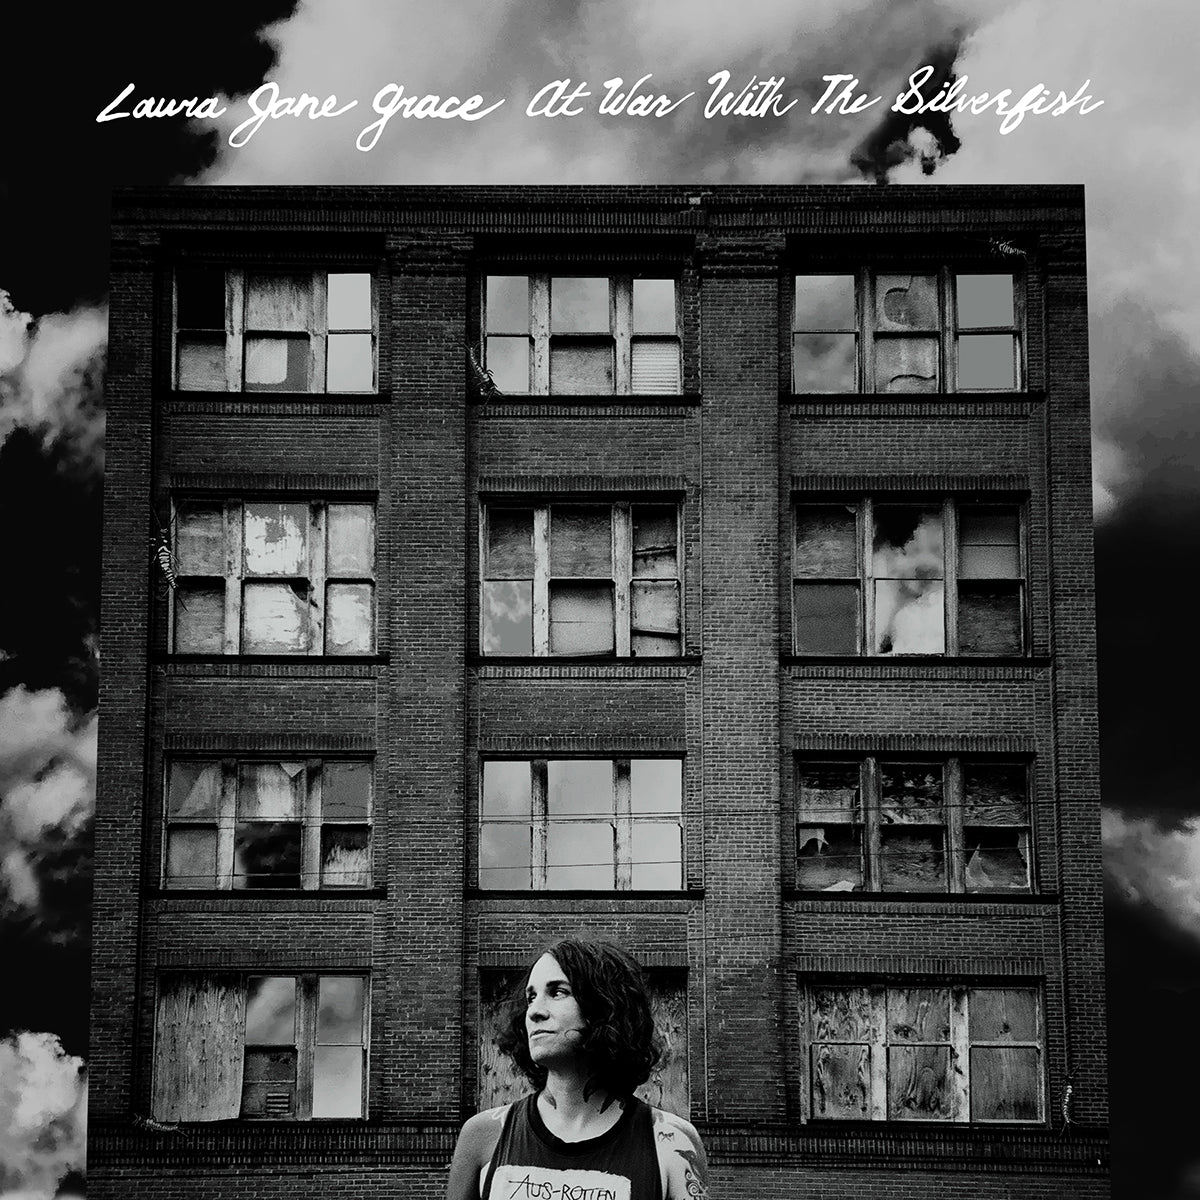 Laura Jane Grace – At War With The Silverfish  10”